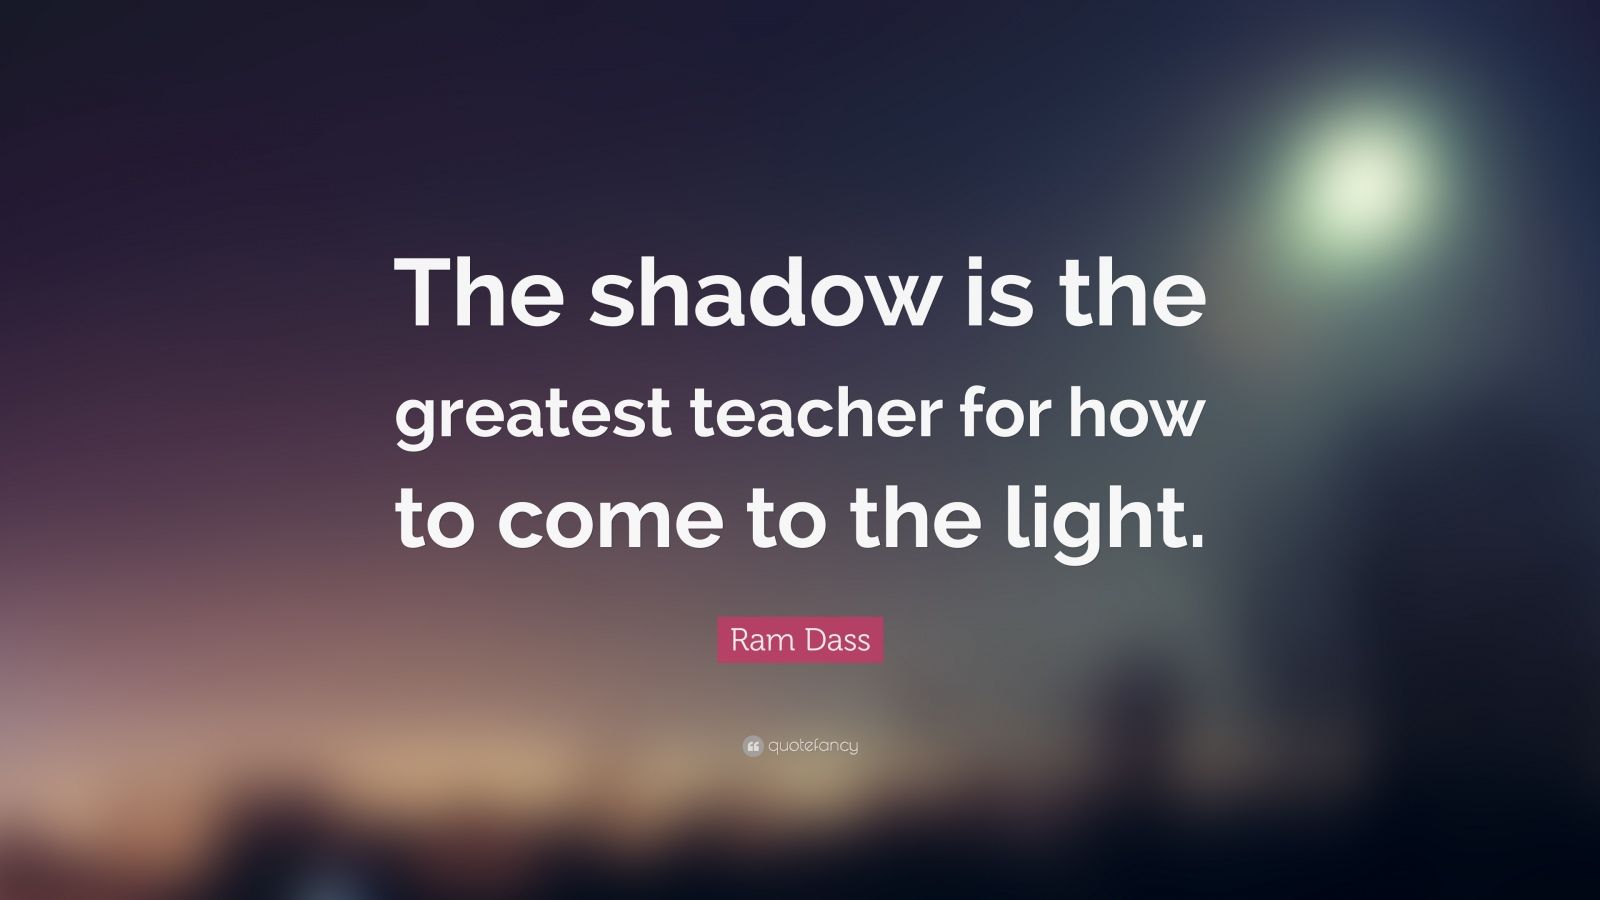 Ram Dass Quote: “The shadow is the greatest teacher for how to come to